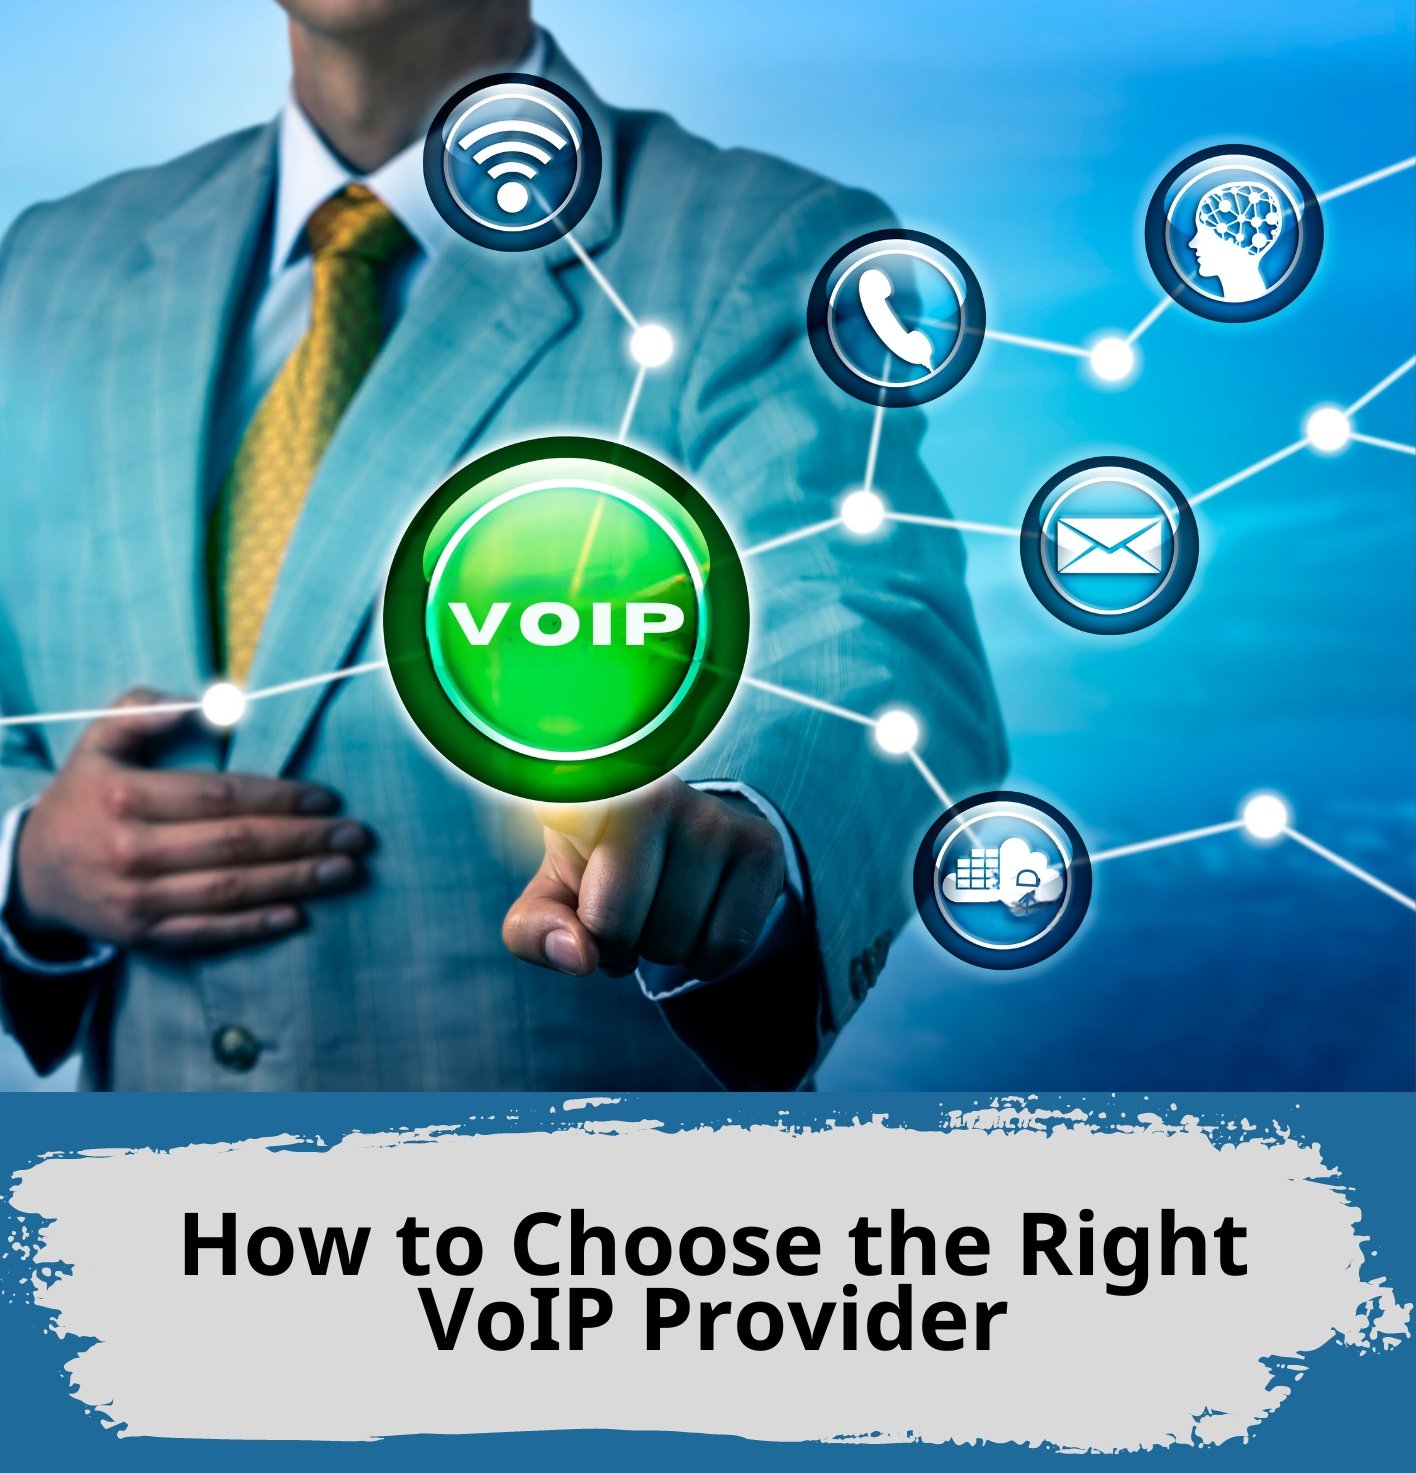 How to Choose the Right VoIP Provider